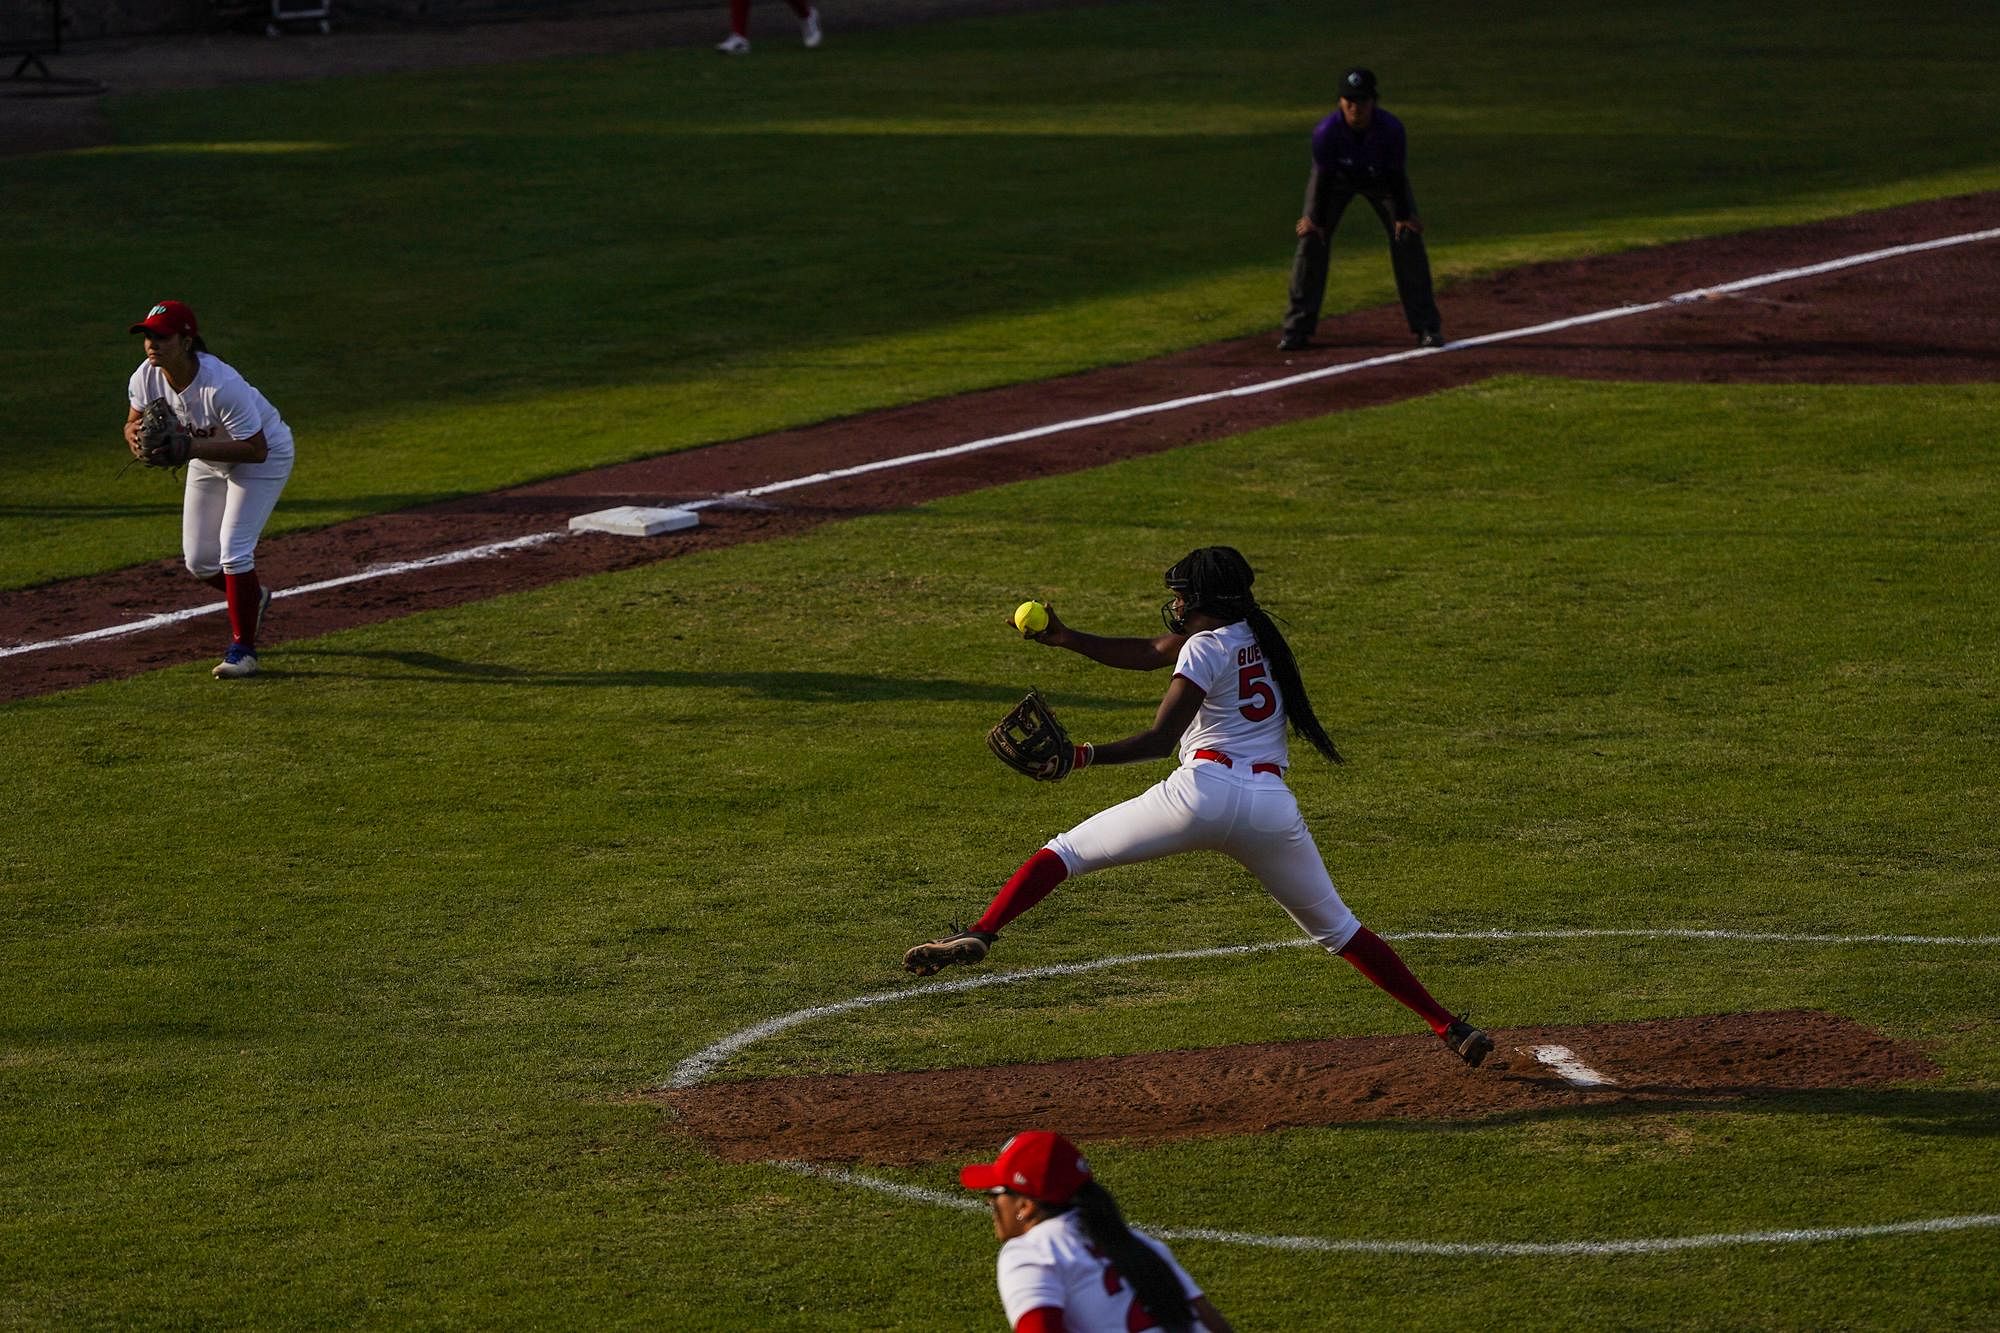 In Latin America, a new frontier for women: professional softball in Mexico